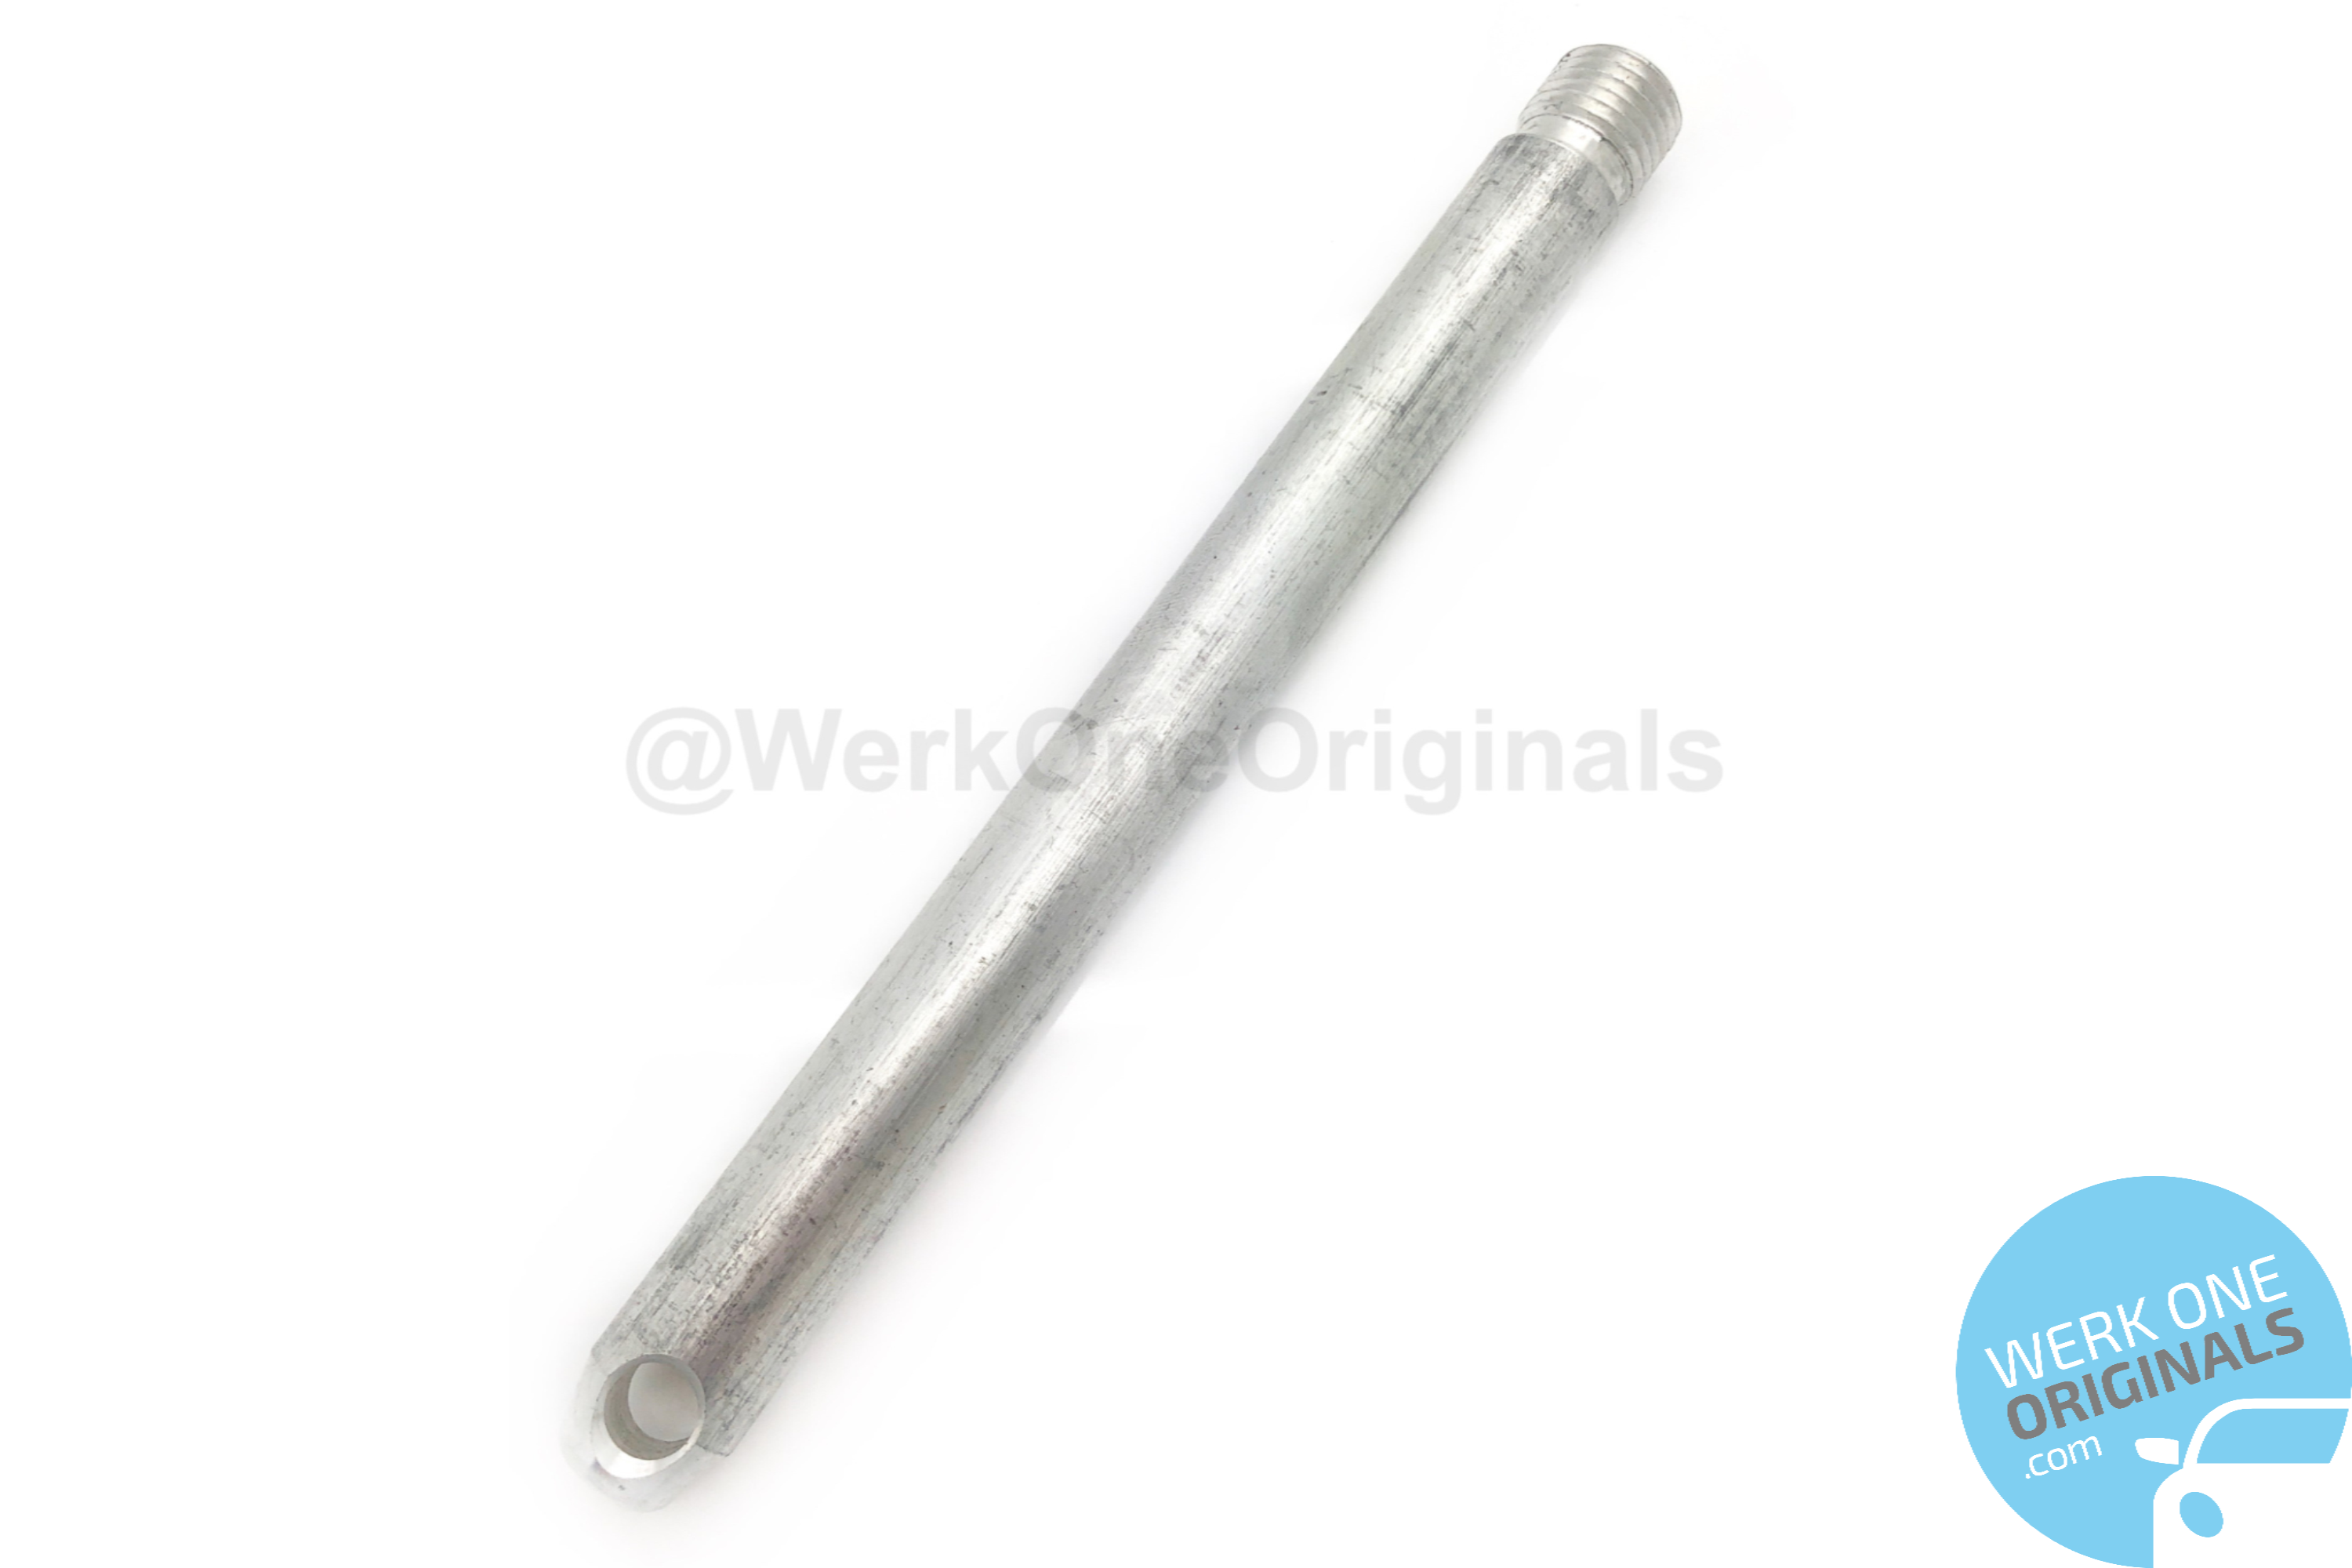 Porsche Official Wheel Removal Tool for Panamera Type 971 Models